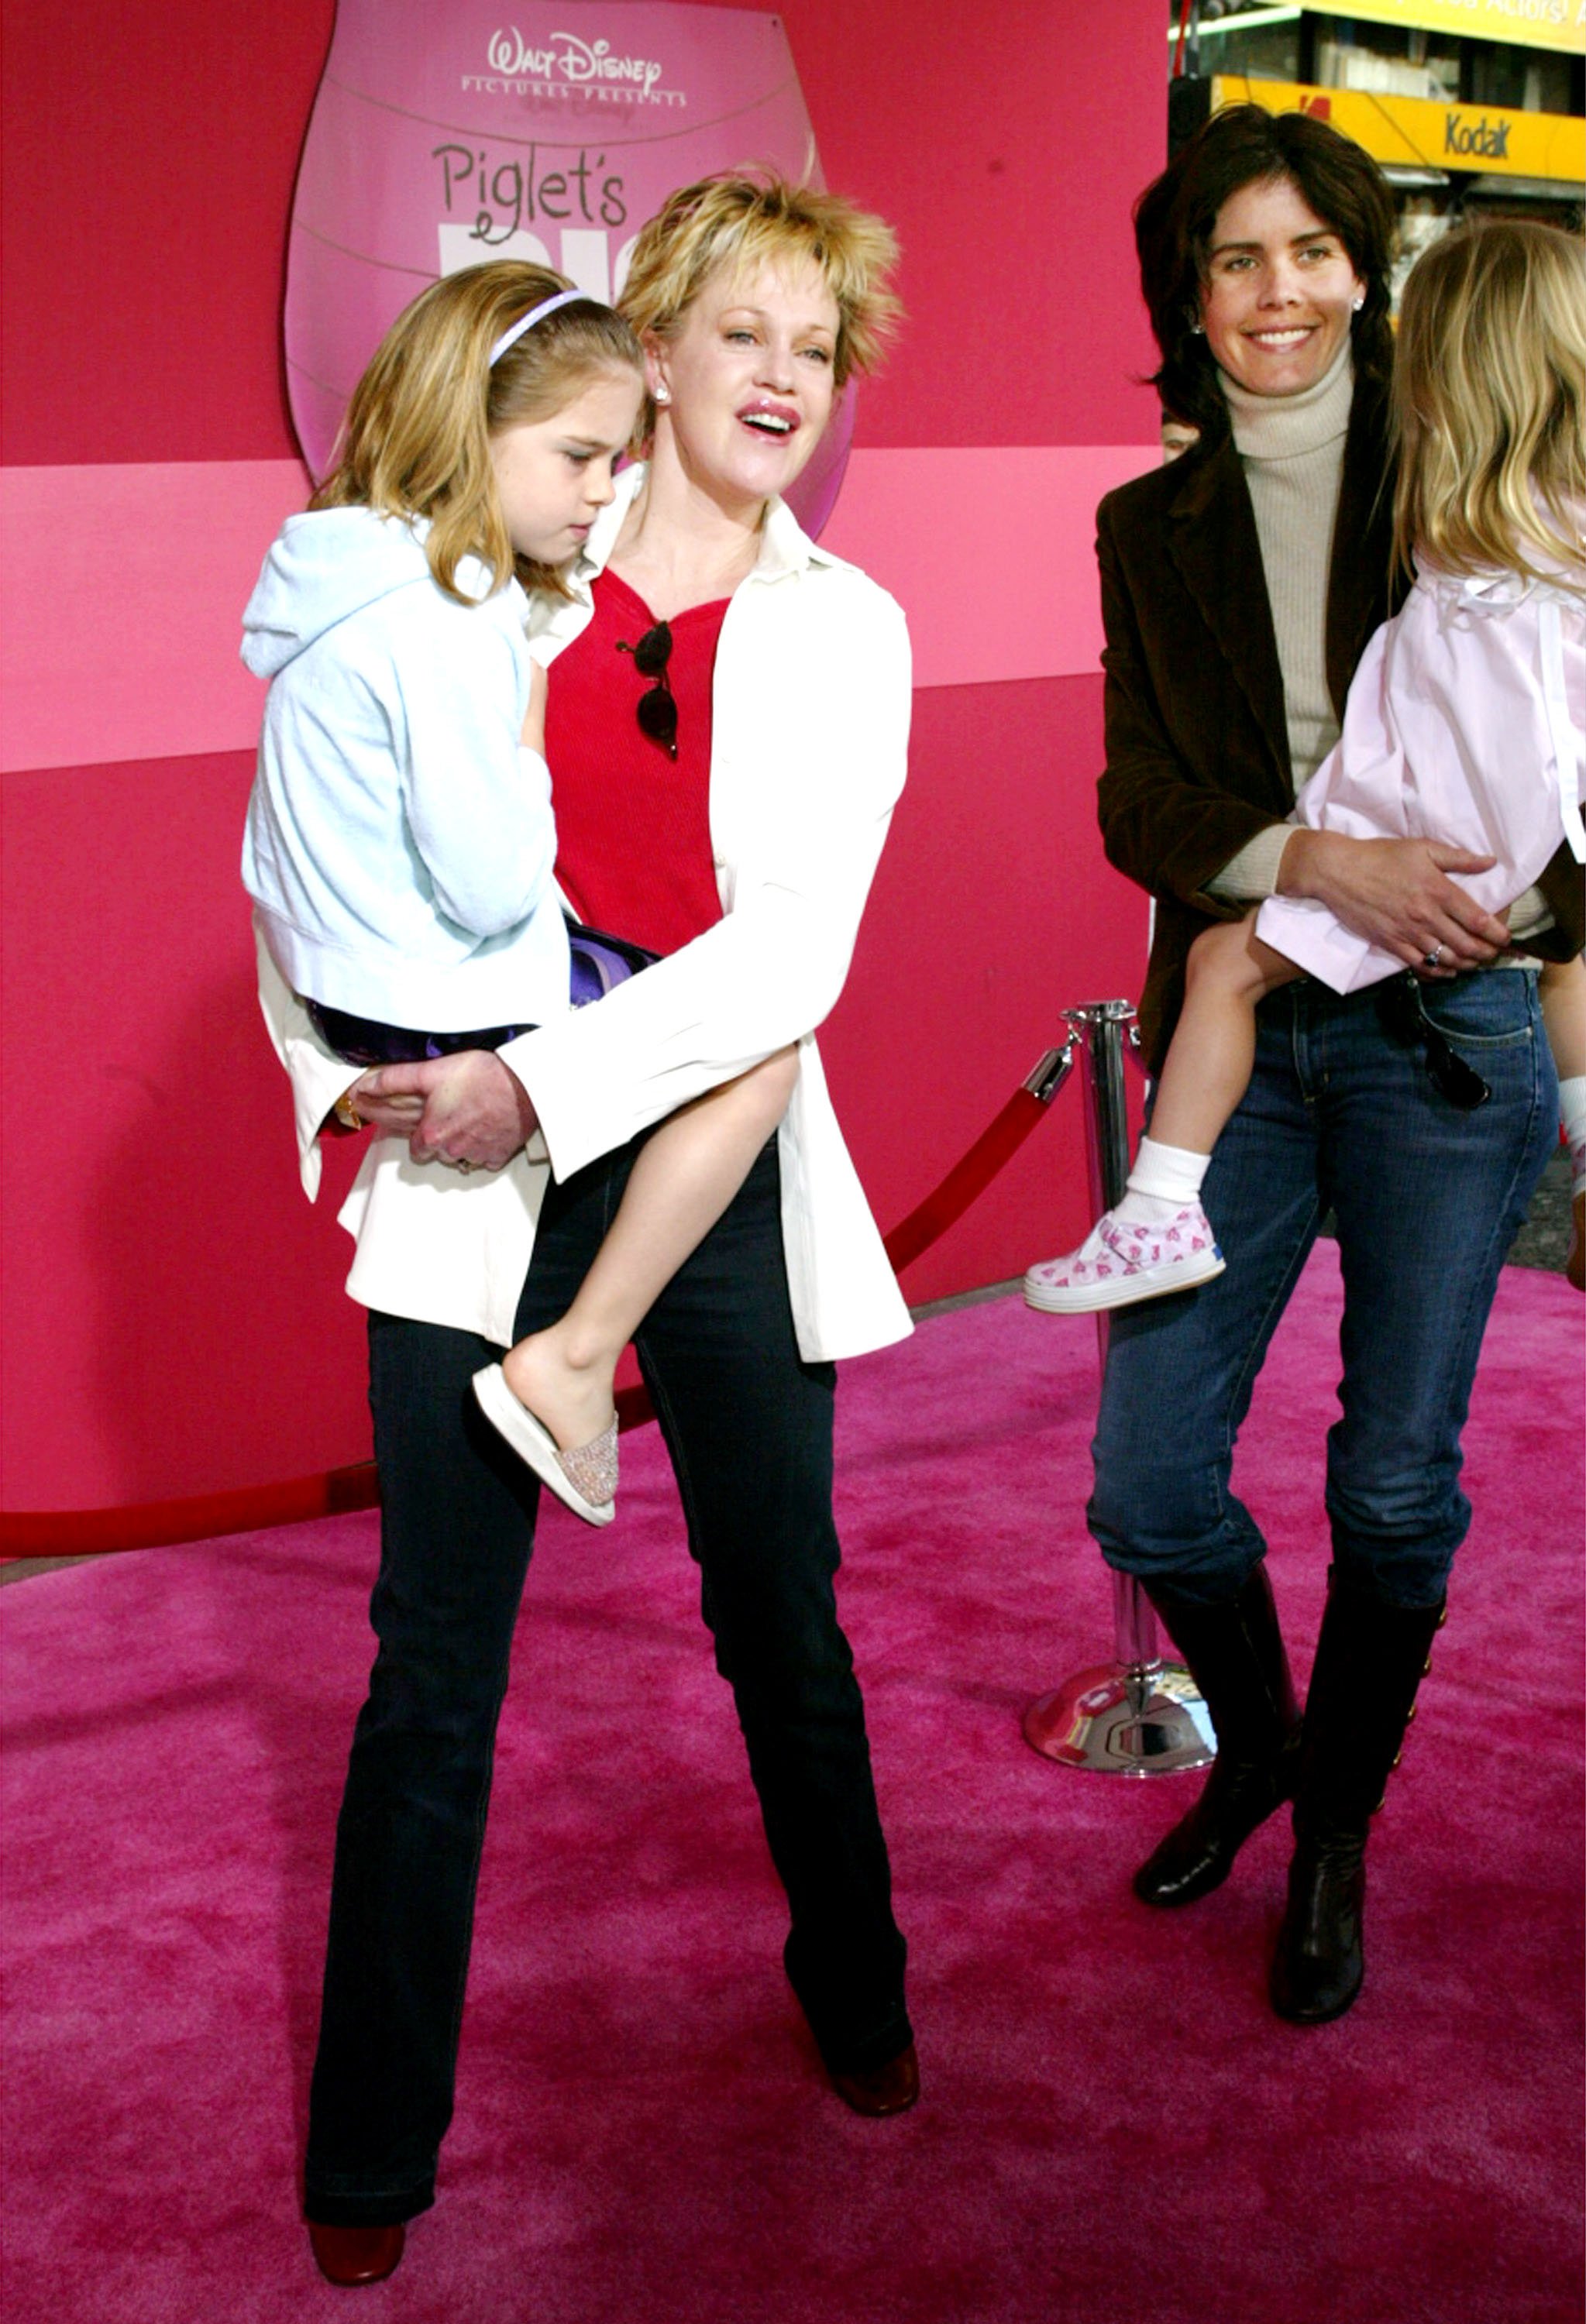 Melanie Griffith and Kelley Phleger with their children at the film premiere of "Piglet's Big Movie" on March 16, 2003, in Hollywood, California | Source: Getty Images